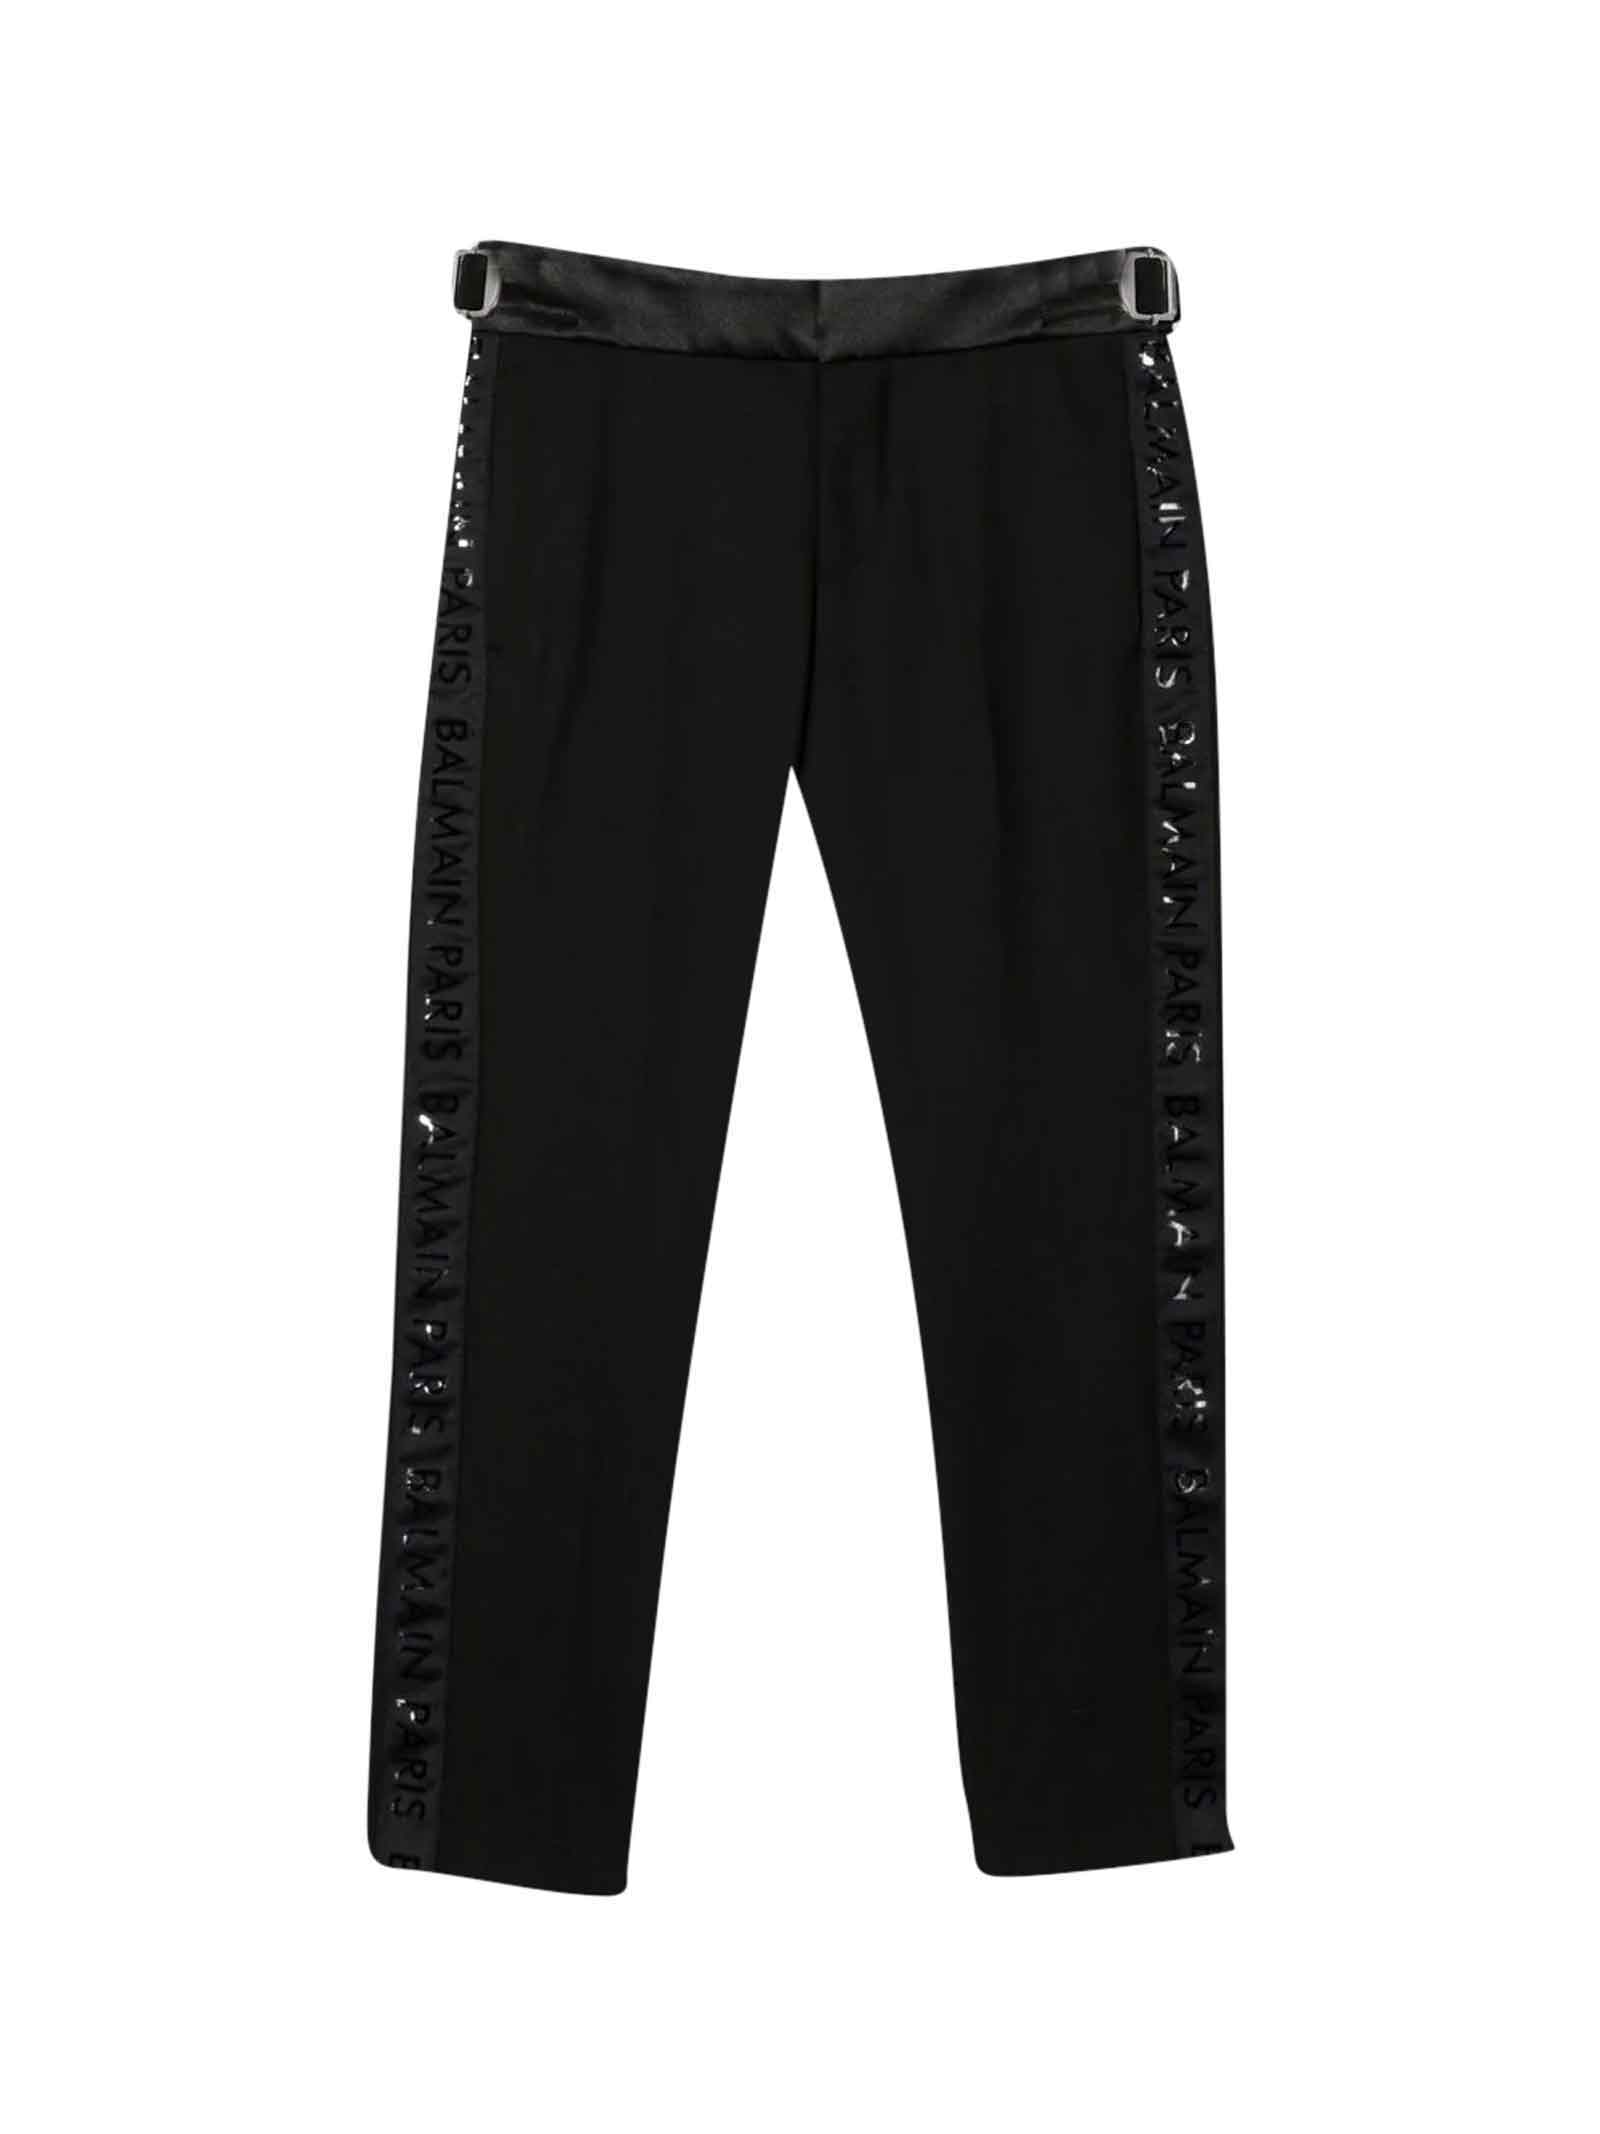 Balmain Black Trousers With Side Bands